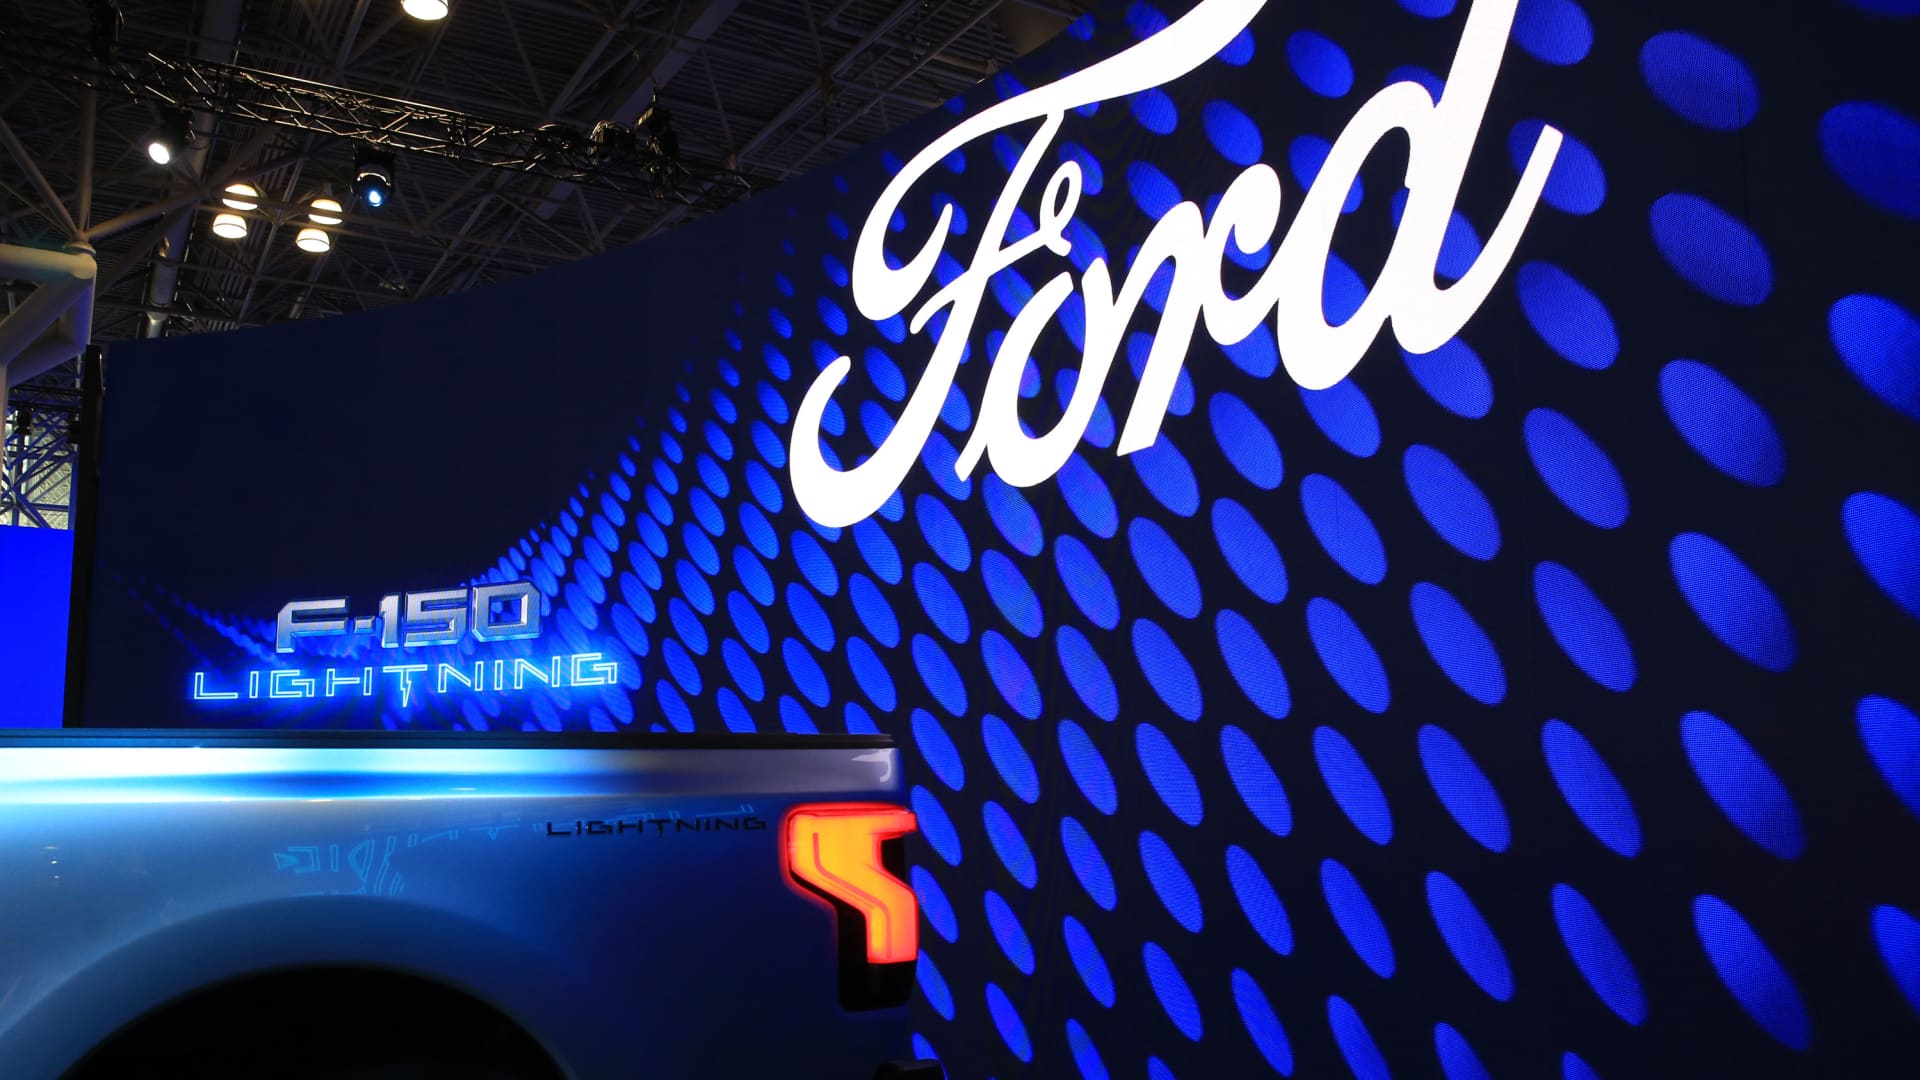 Ford stock suffers worst day since 2011 after cost warning, shedding $7 billion in market value Auto Recent